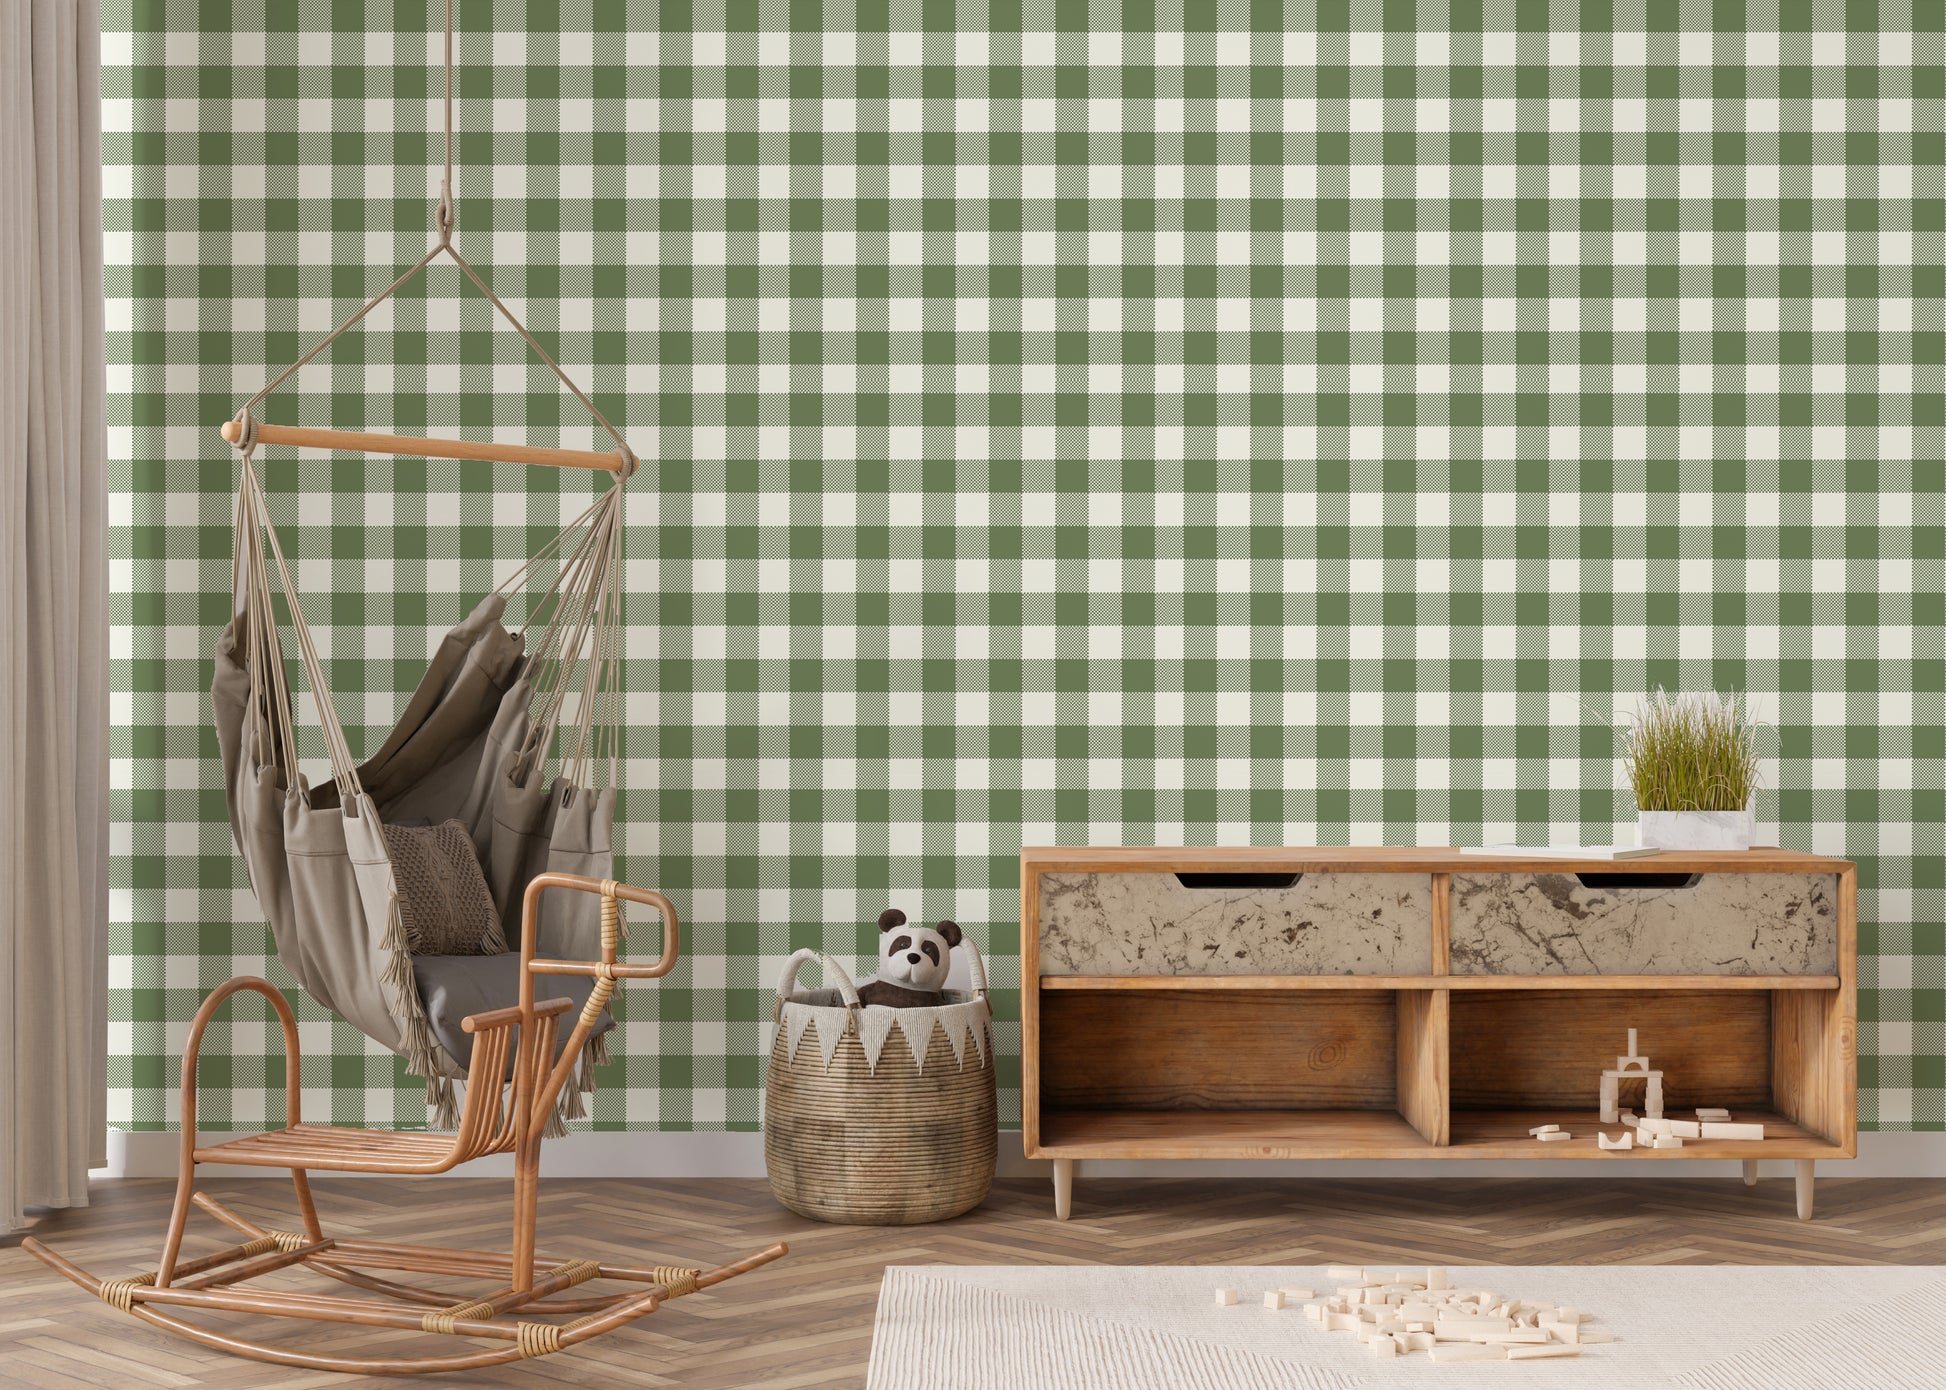 Green Gingham wallpaper in living space